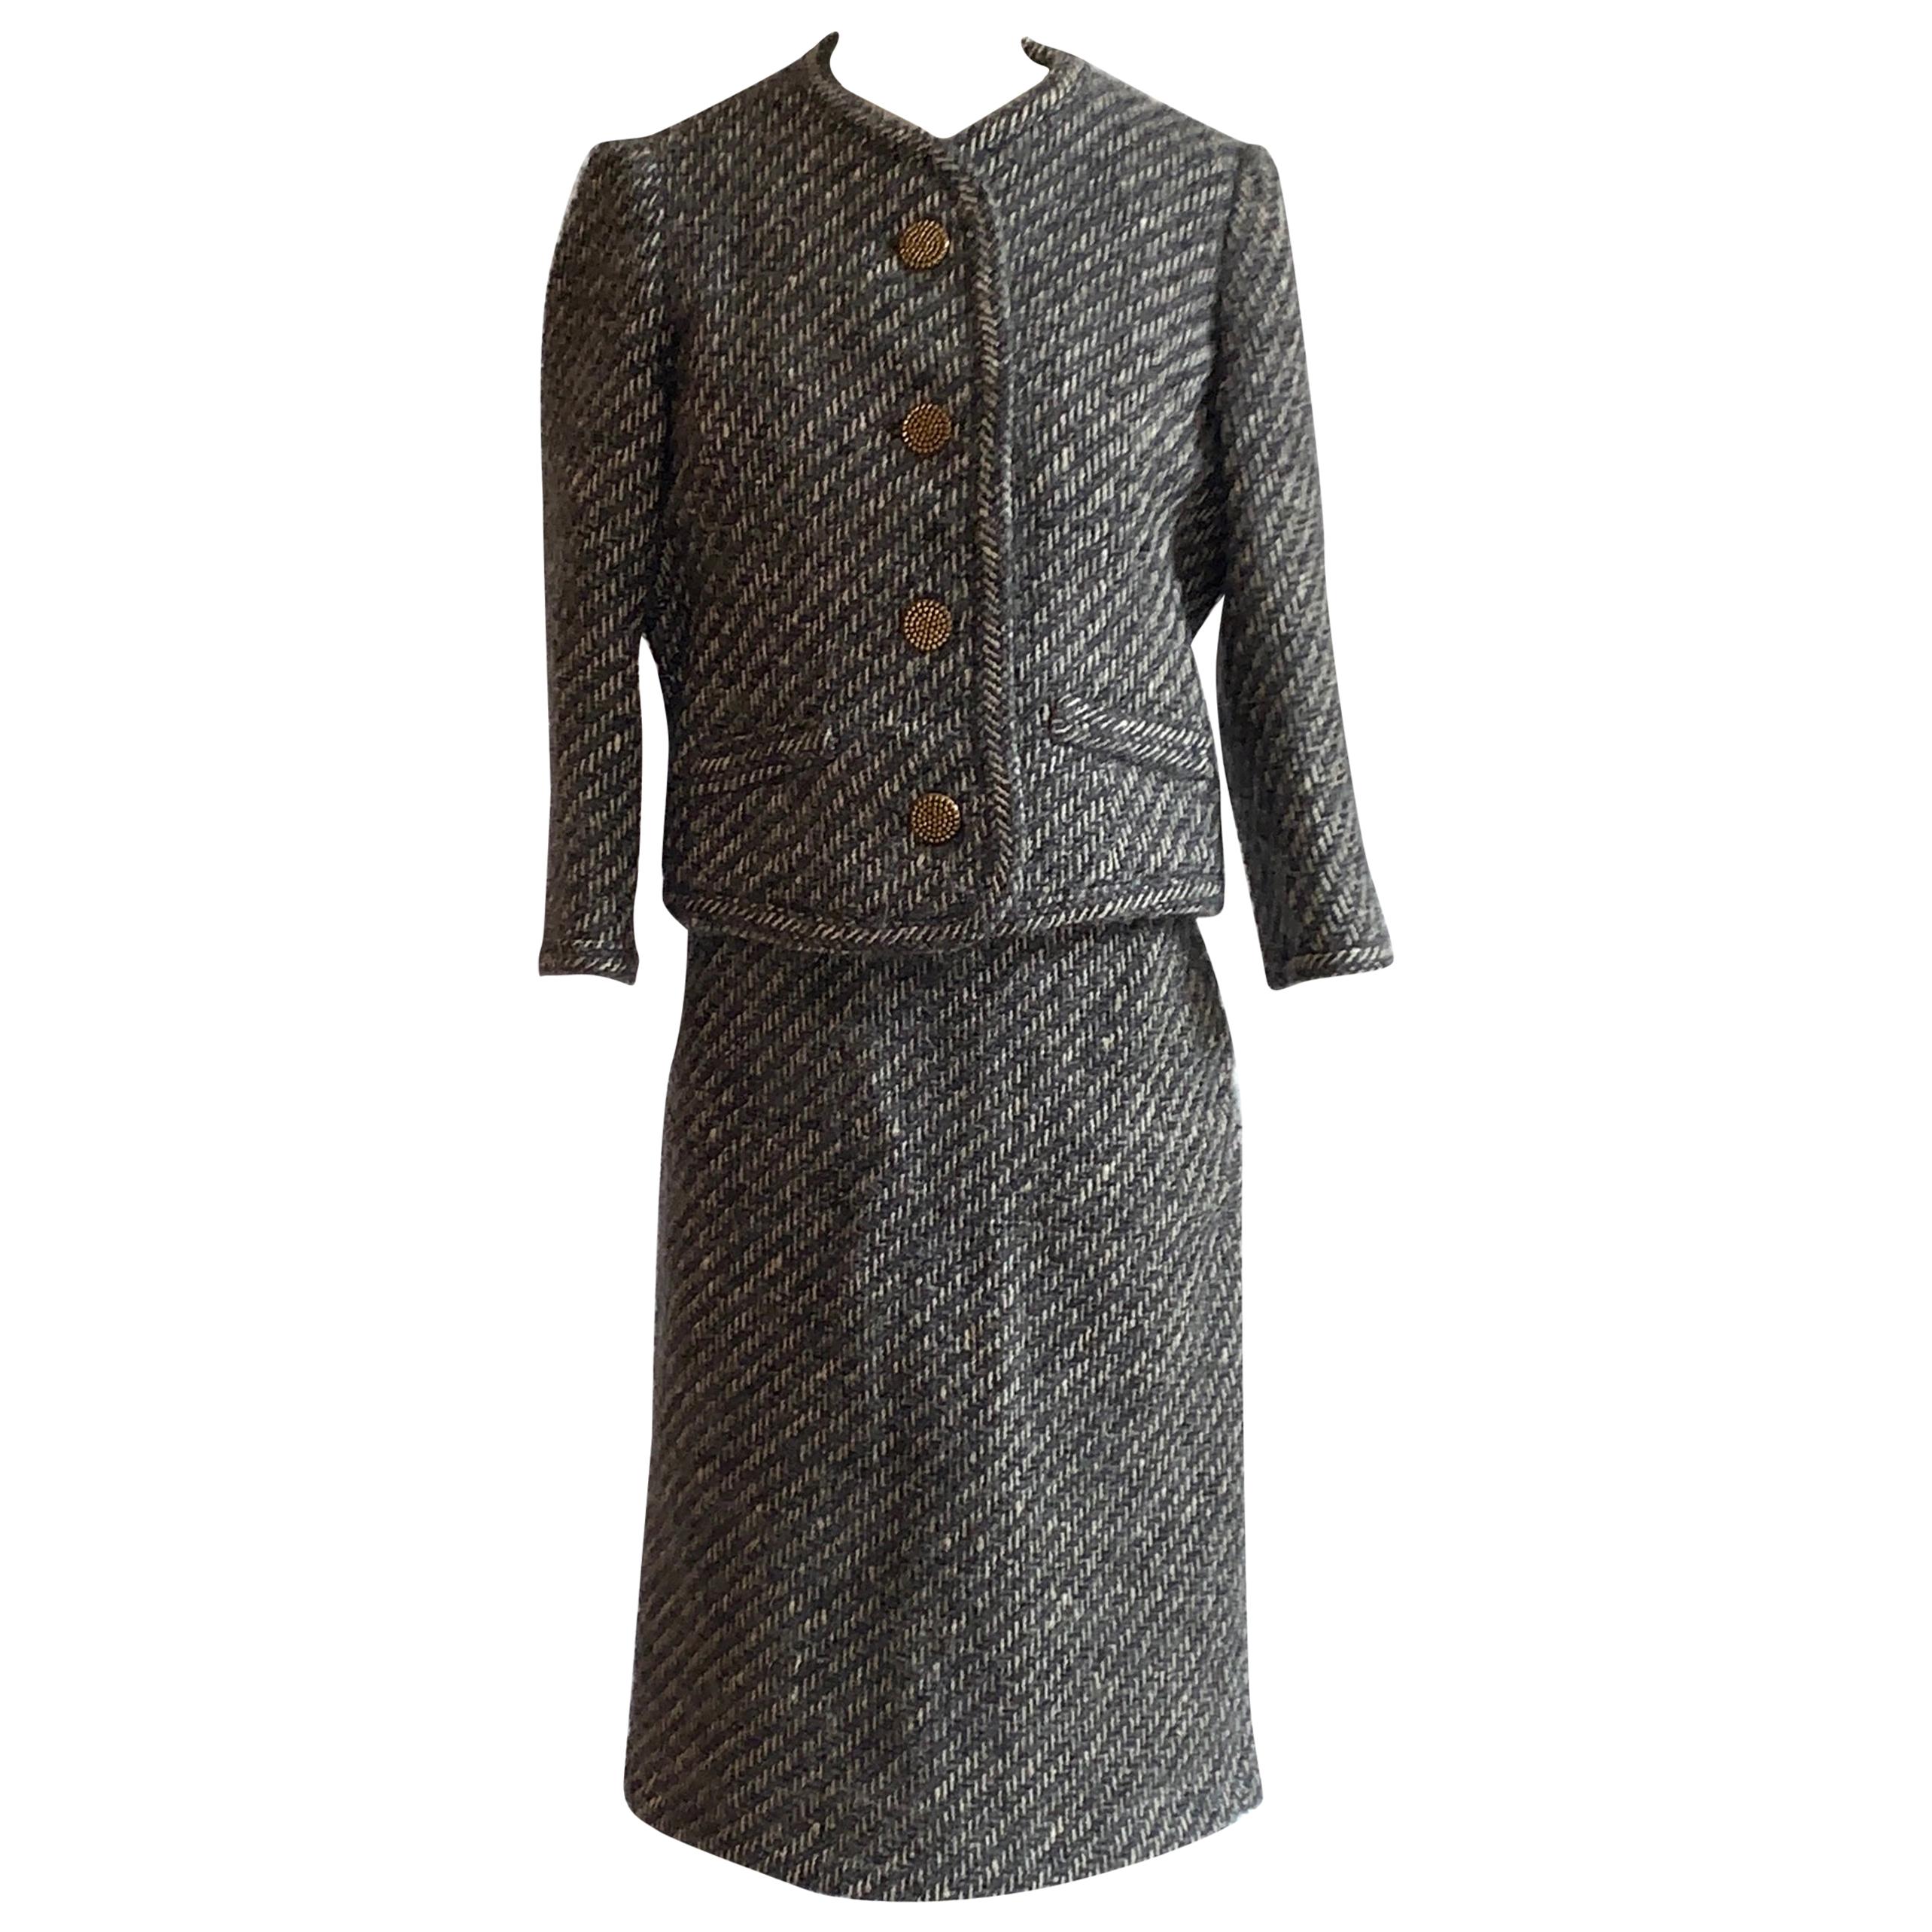 Sophie of Saks Sophie Gimbel Grey 1960s Skirt Suit in Grey and White Fuzzy Weave For Sale